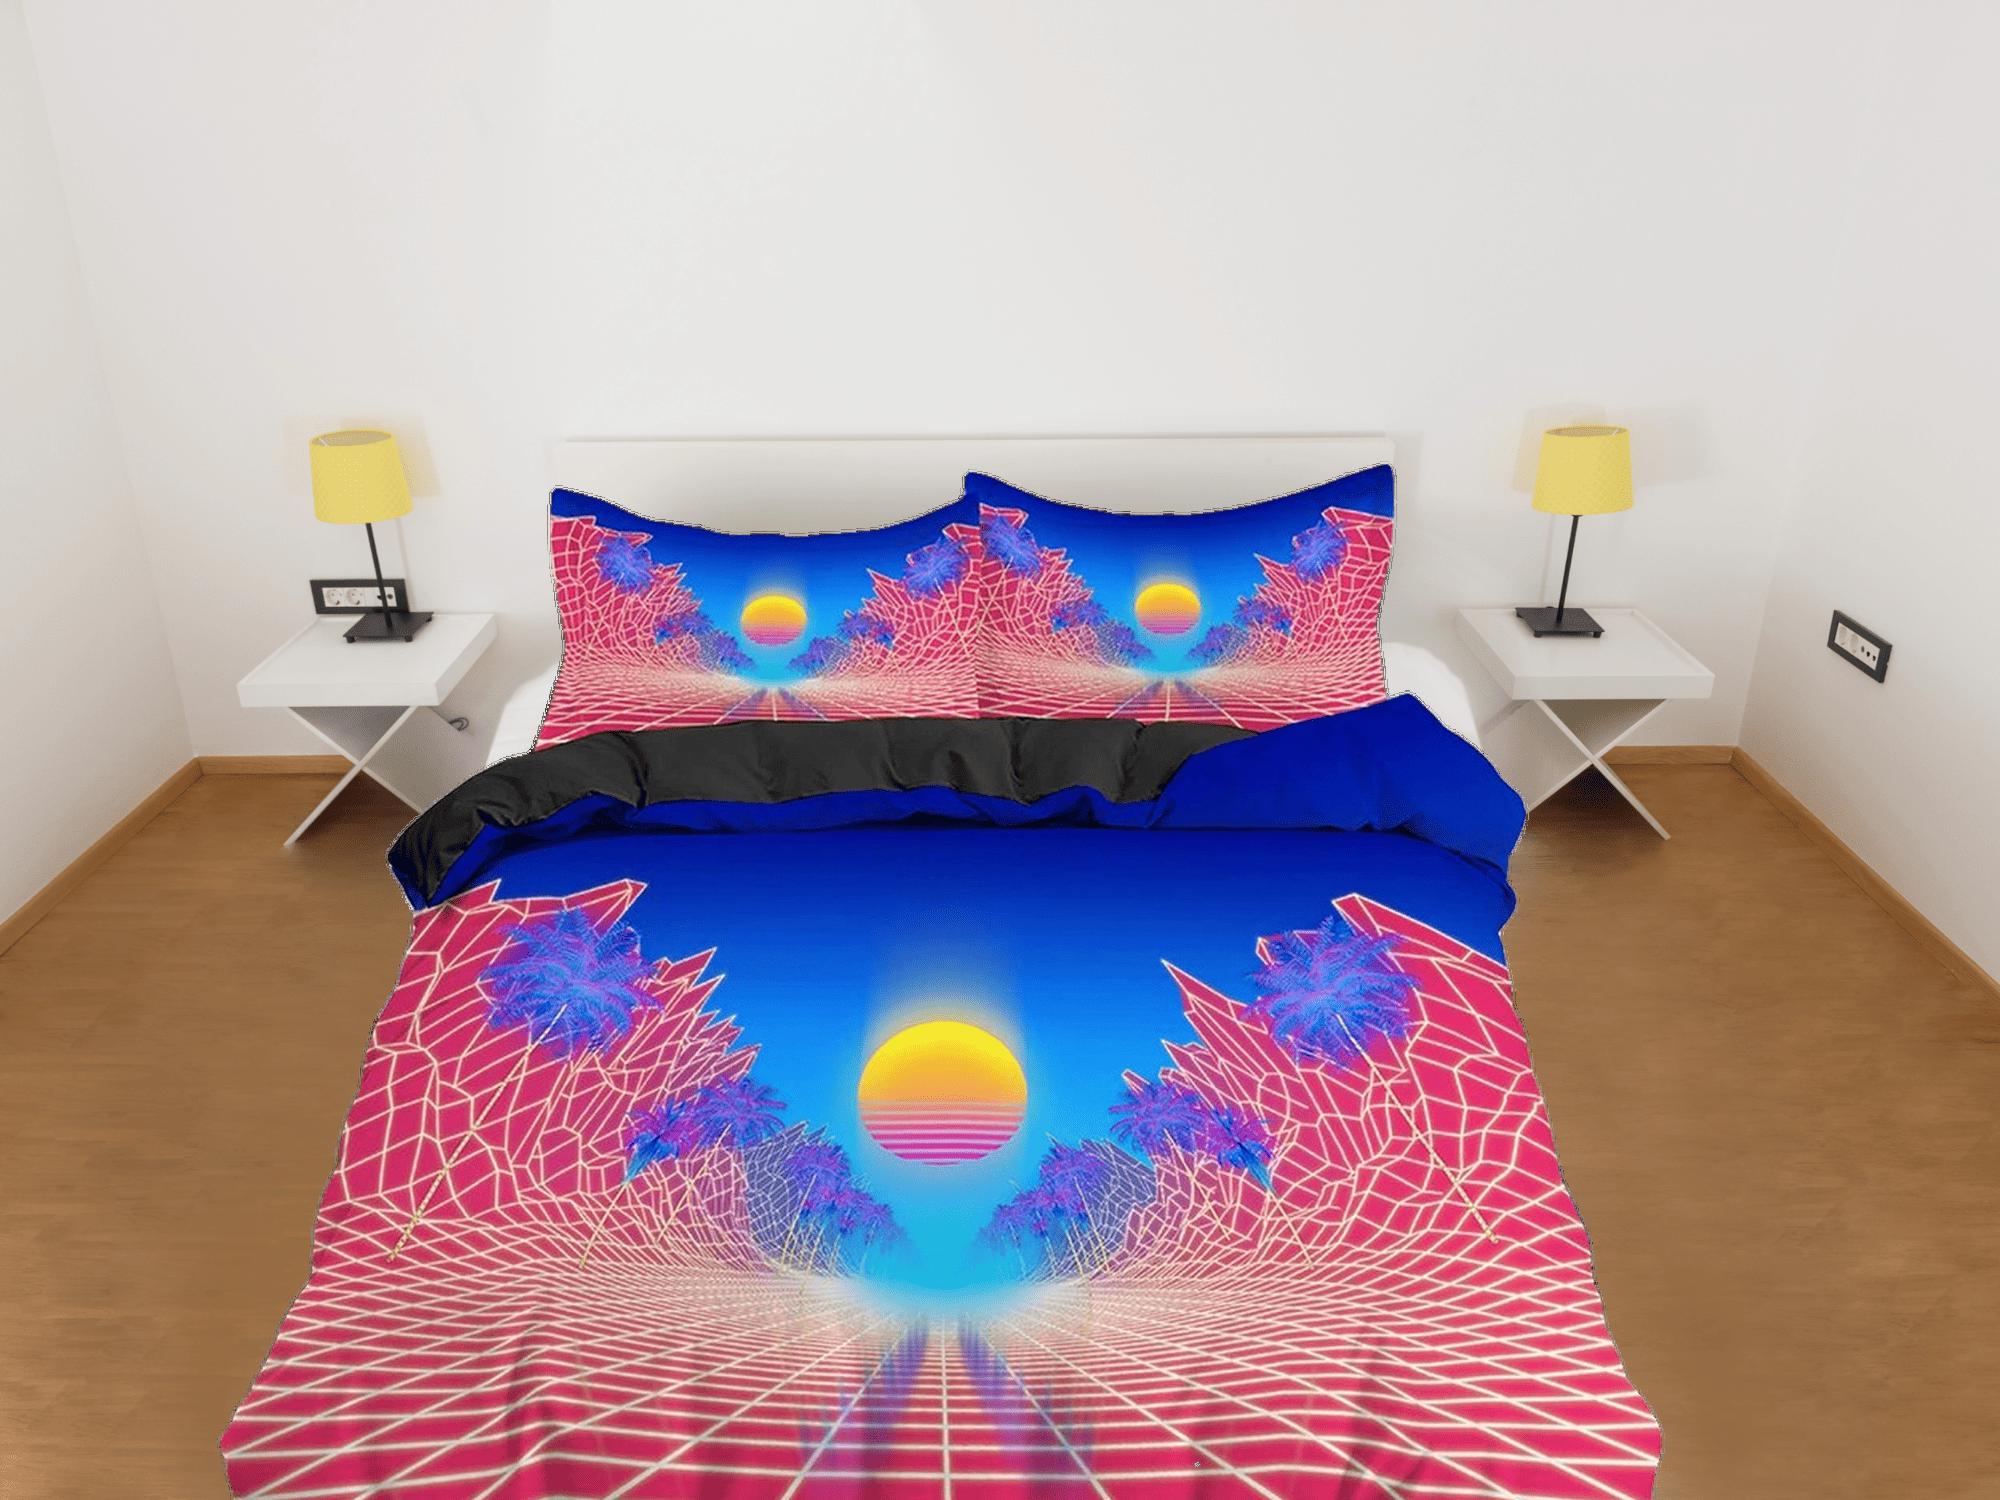 daintyduvet Vaporwave Sun in Pink and Blue Bedding, Cool Hippie Geometric Duvet Cover Set, Trippy Psychedelic Bed Cover, 90s Nostalgia Home Decor